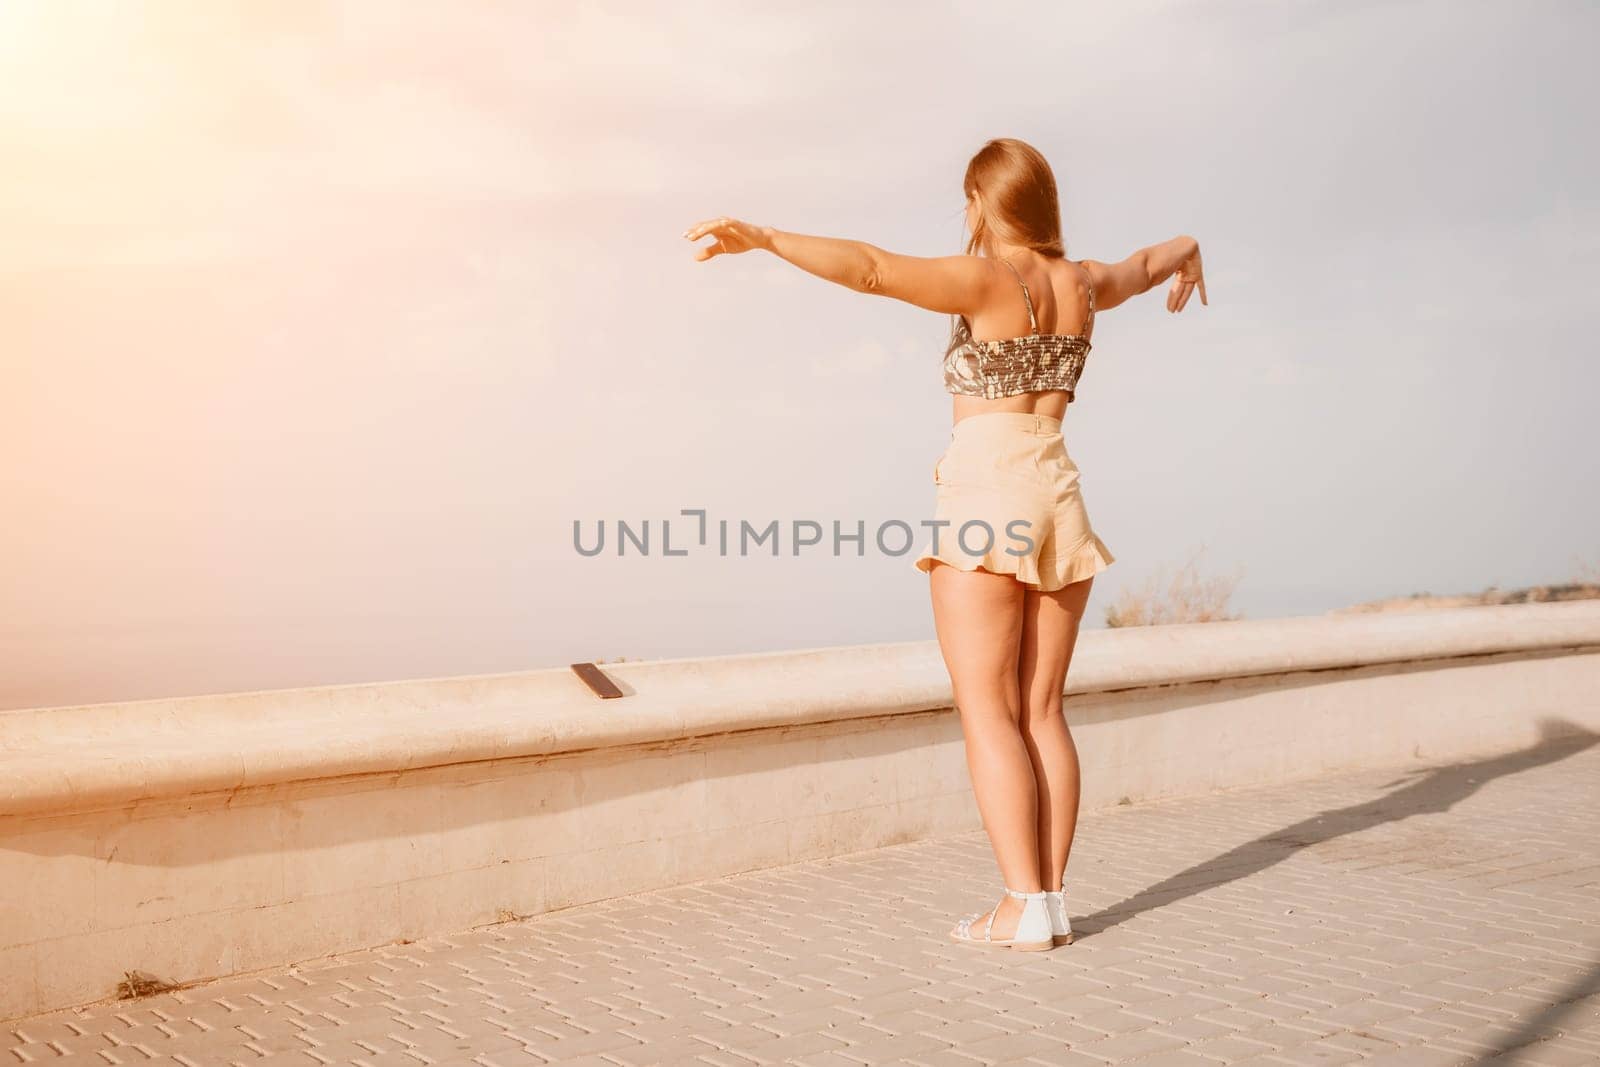 Woman summer dance. Silhouette of a happy woman who dances, spins and raises her hands to the sky. A playful young woman enjoys her happy moment dancing in the rays of the golden sun. by panophotograph